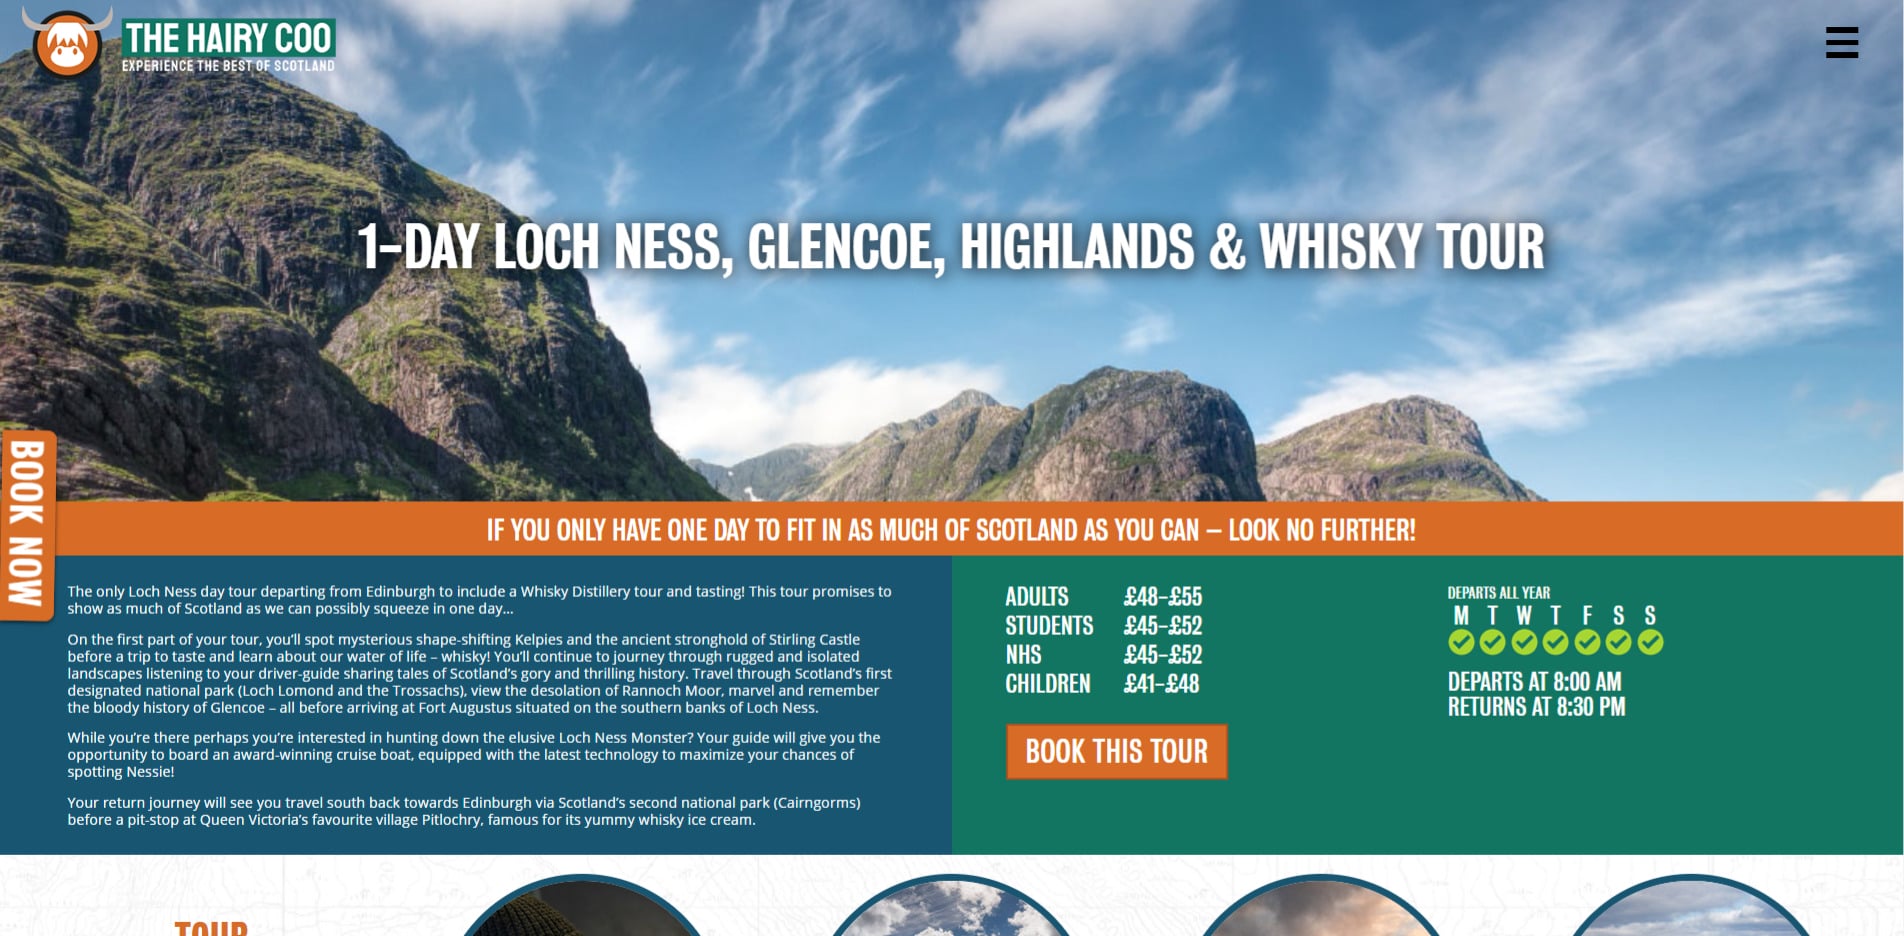 Hairy Coo Website Design 2020 Tours